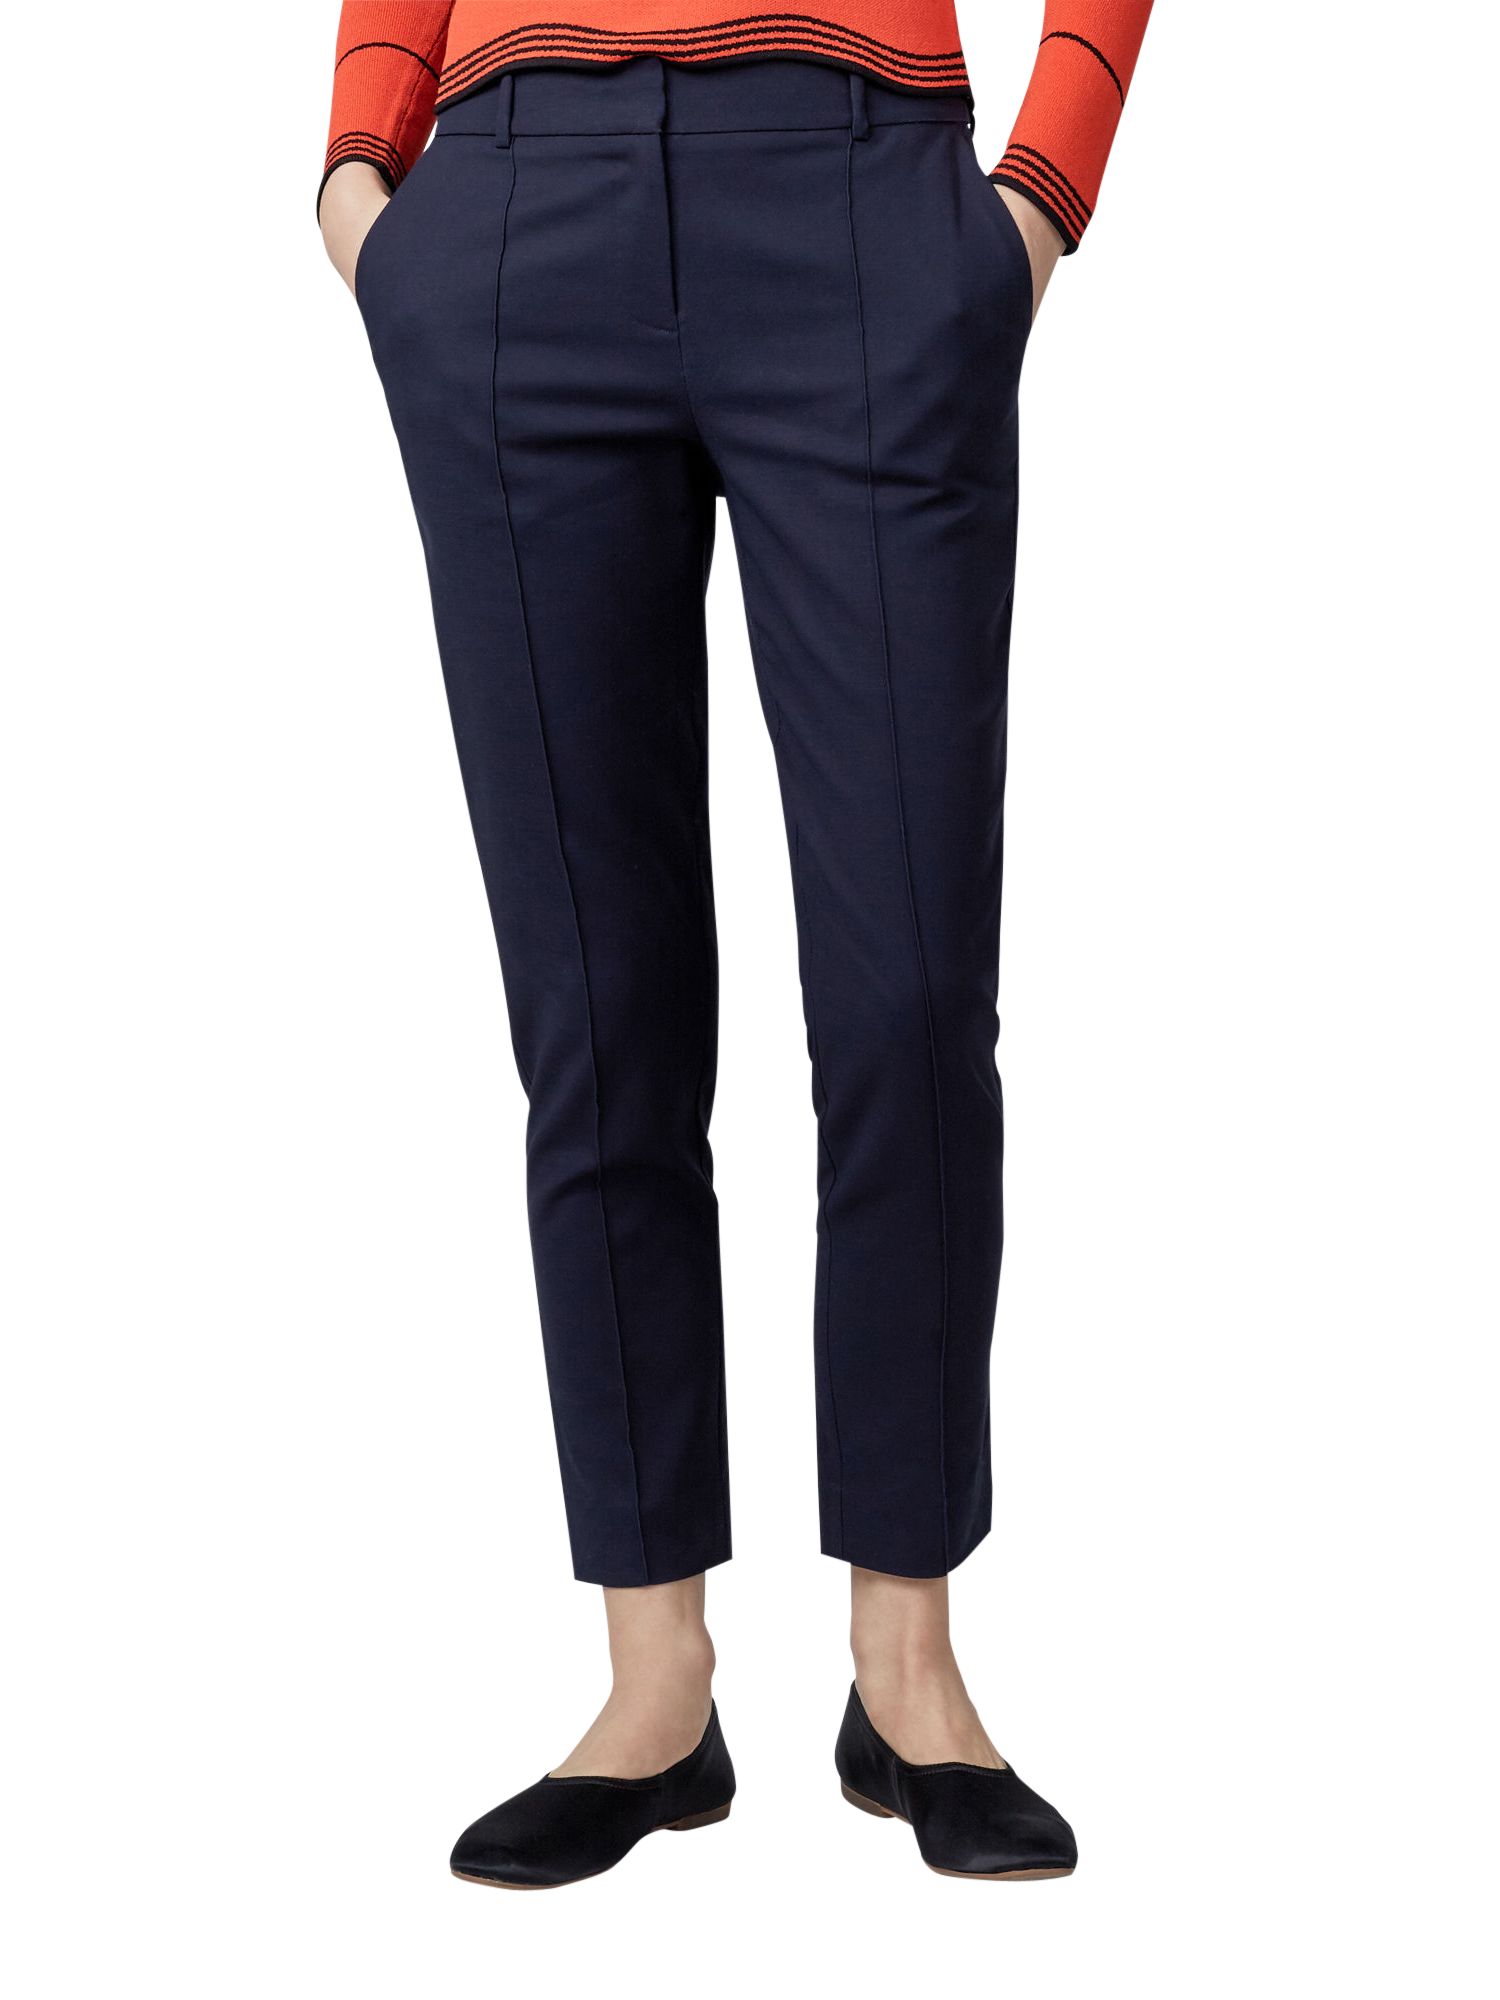 Warehouse Compact Cotton Trousers, Navy, 18